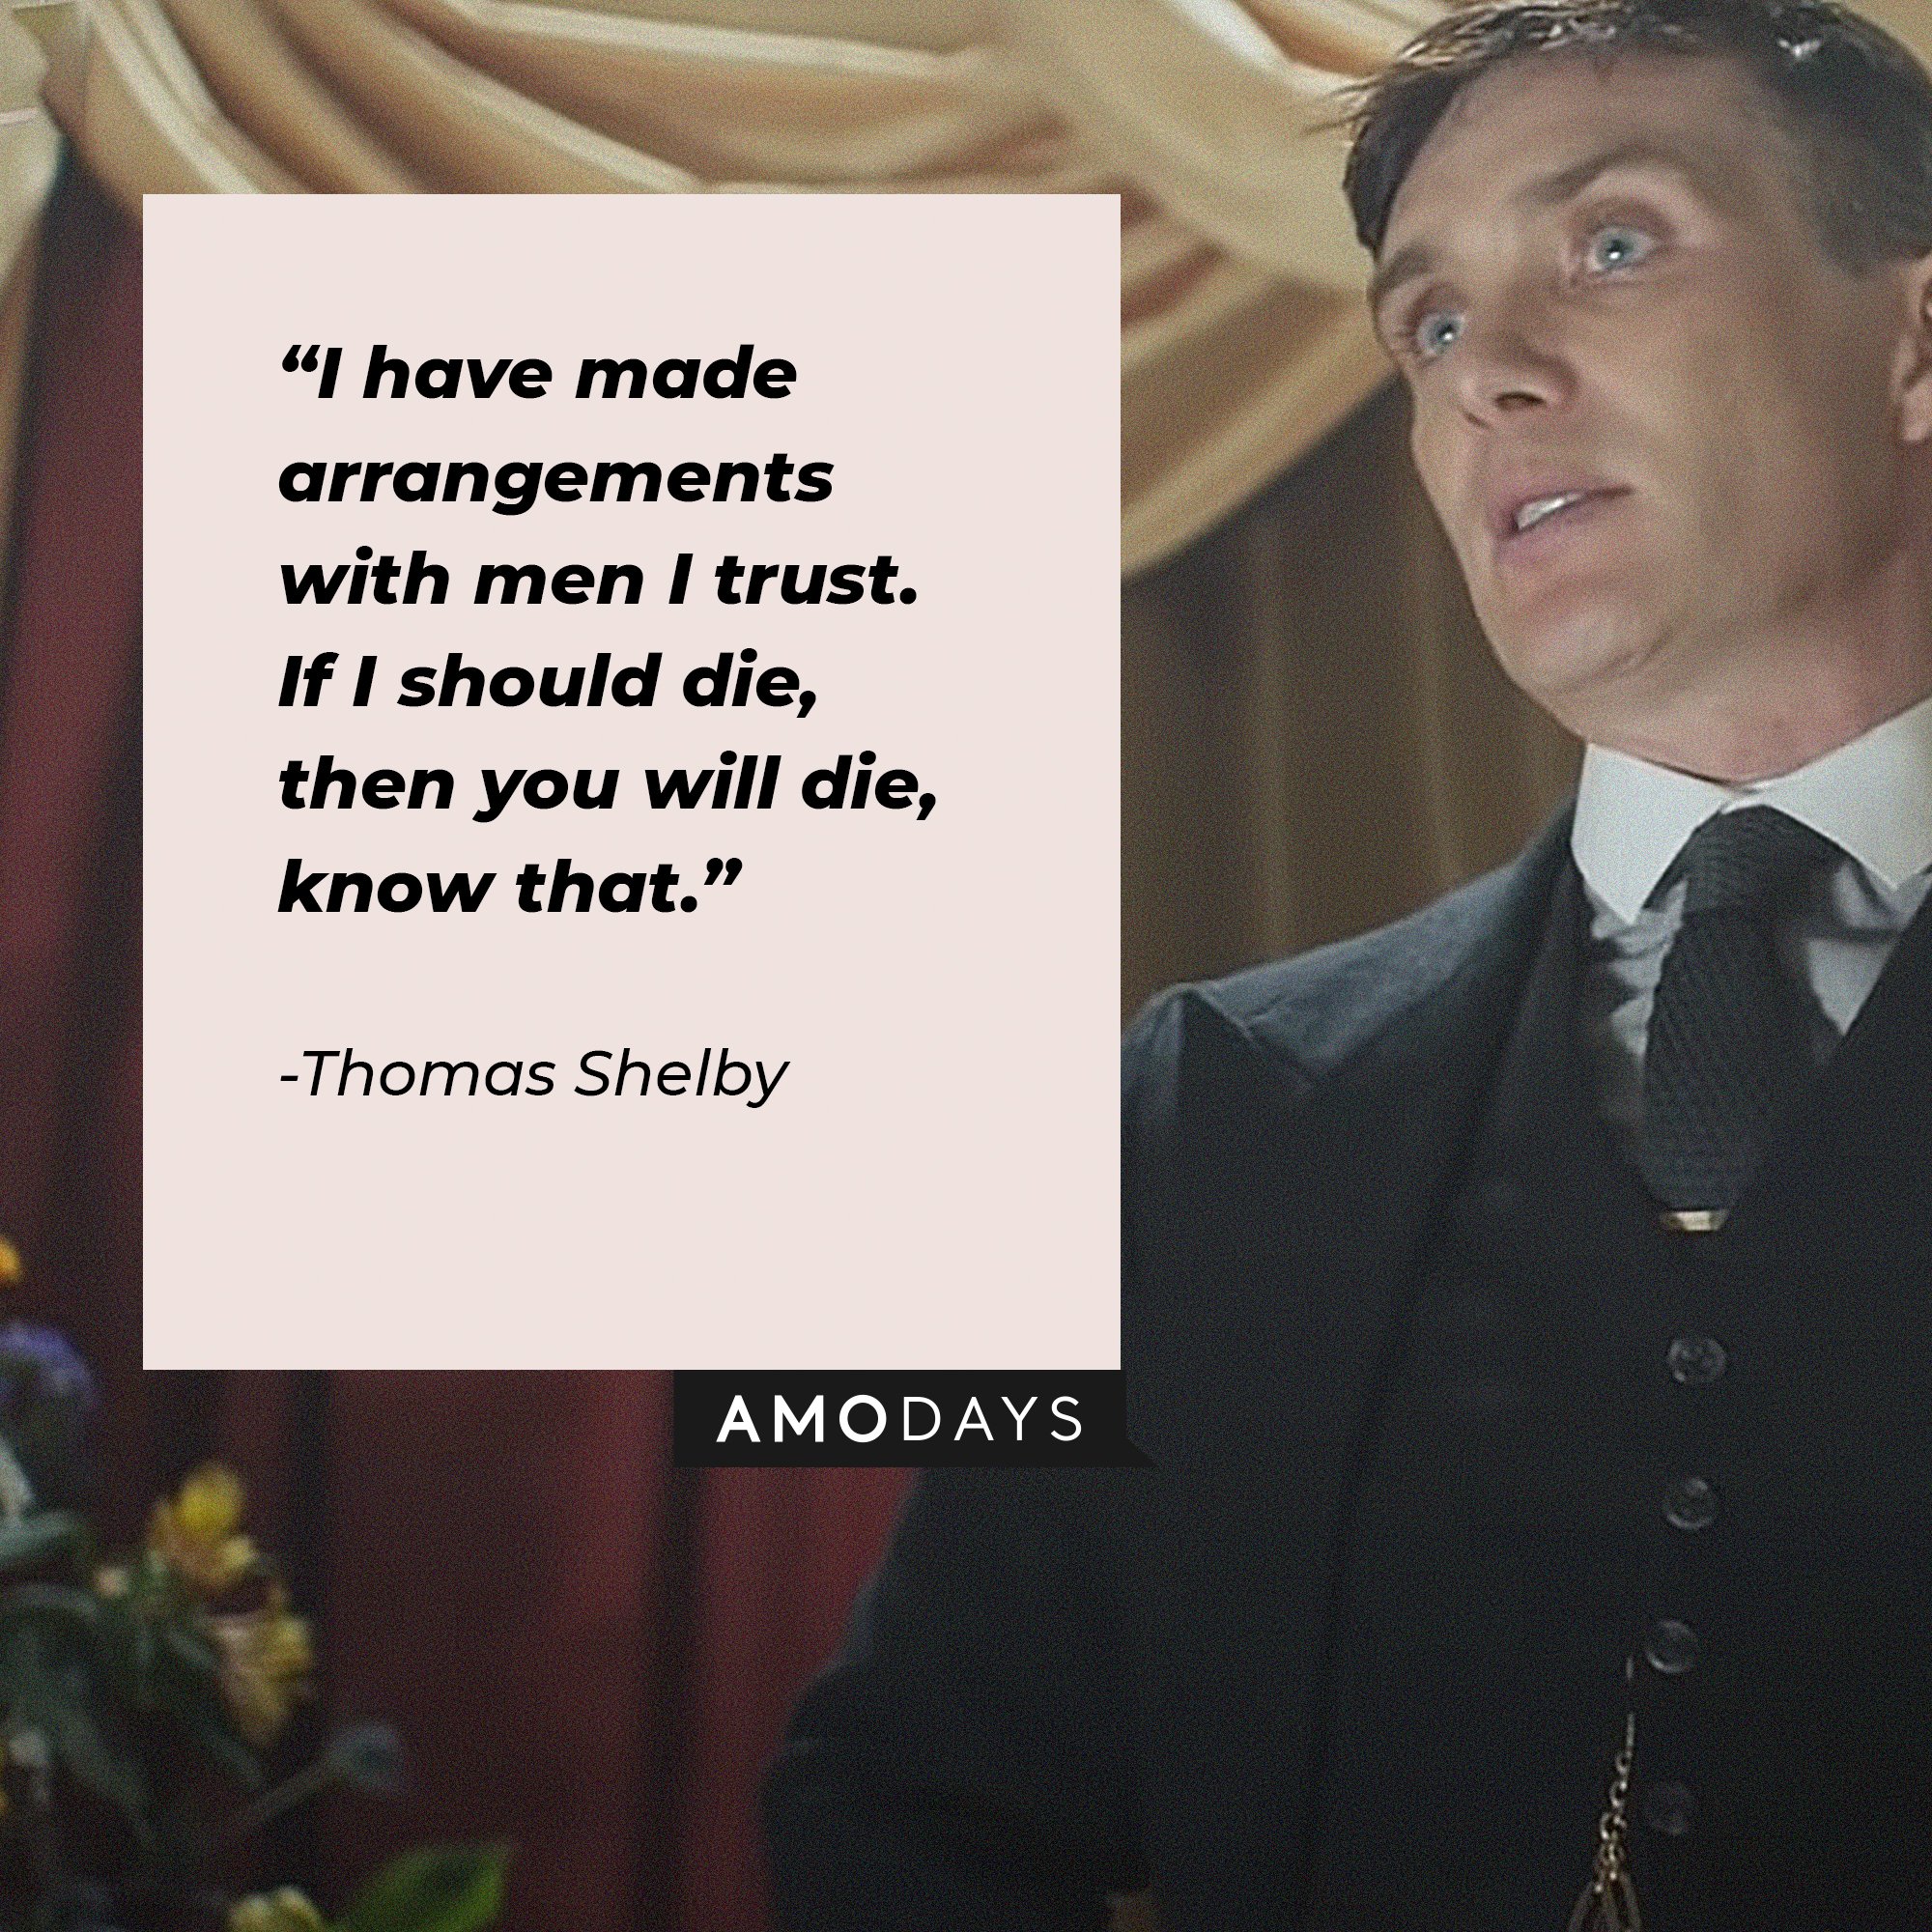 Thomas Shelby's quote:  “I have made arrangements with men I trust. If I should die, then you will die, know that.”  | Image: AmoDays